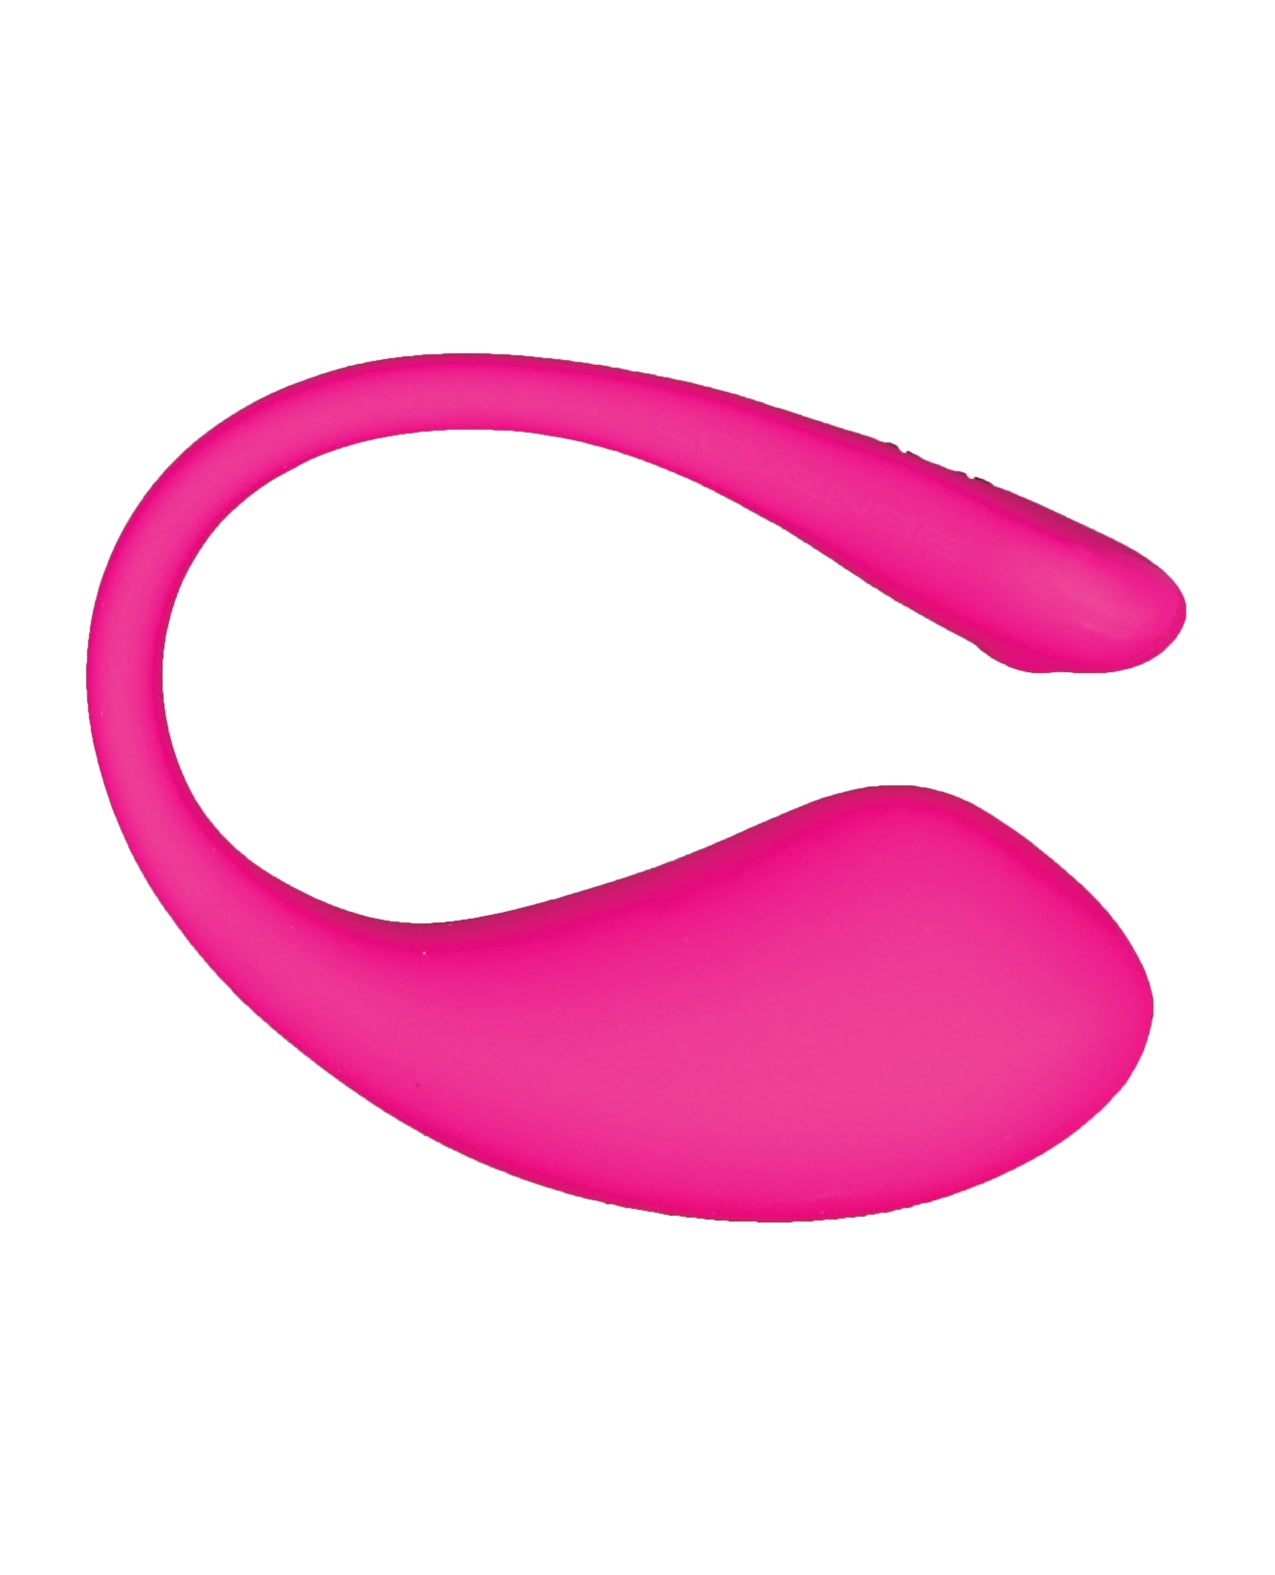 Lovense Lush 3.0 Sound Activated Camming Pink Vibrator